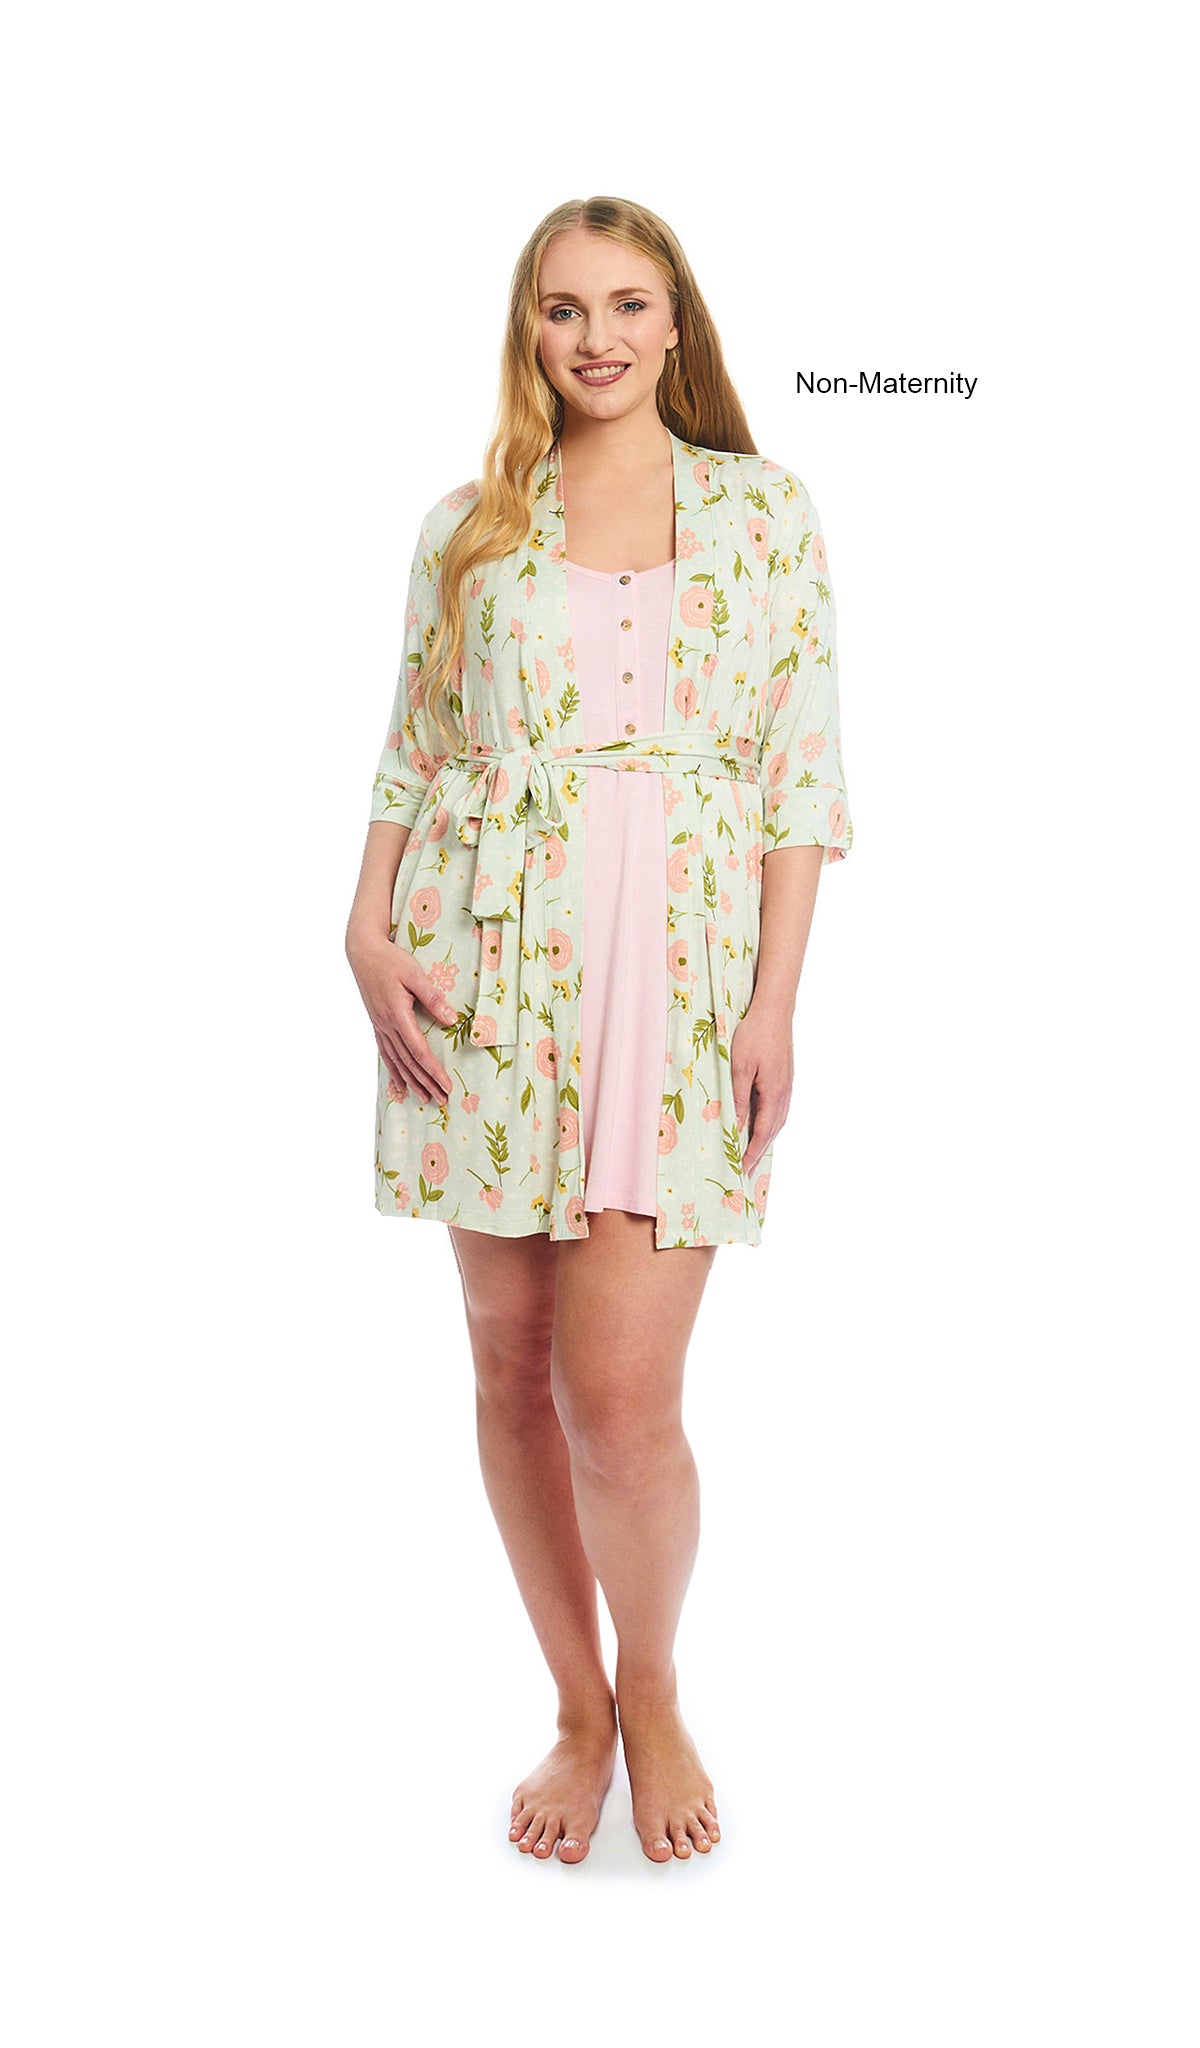 Carnation Carolyn 2-Piece Set. Woman 3/4 sleeve robe and short sleeve button front placket nightgown as non-maternity.